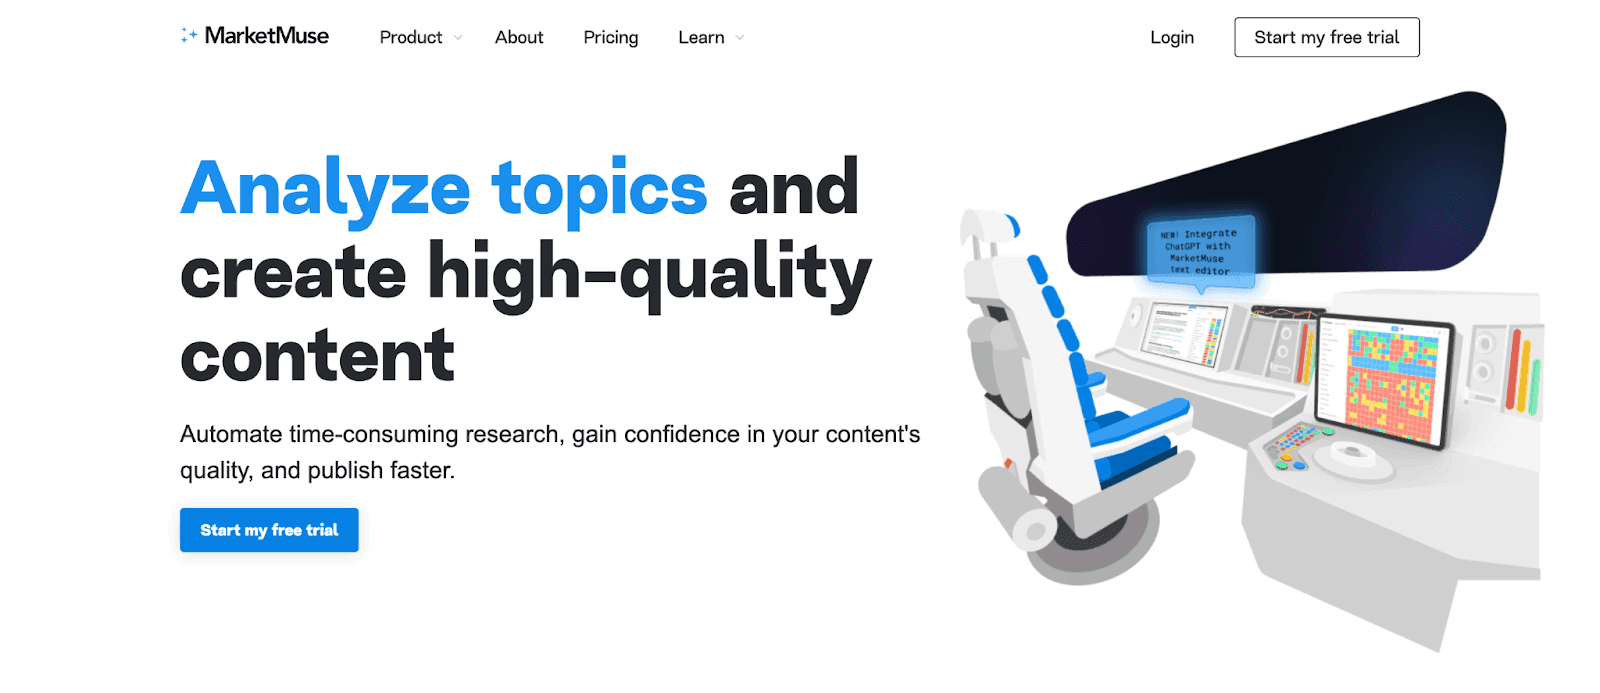 MarketMuse website - Analyze topics and create high-quality content